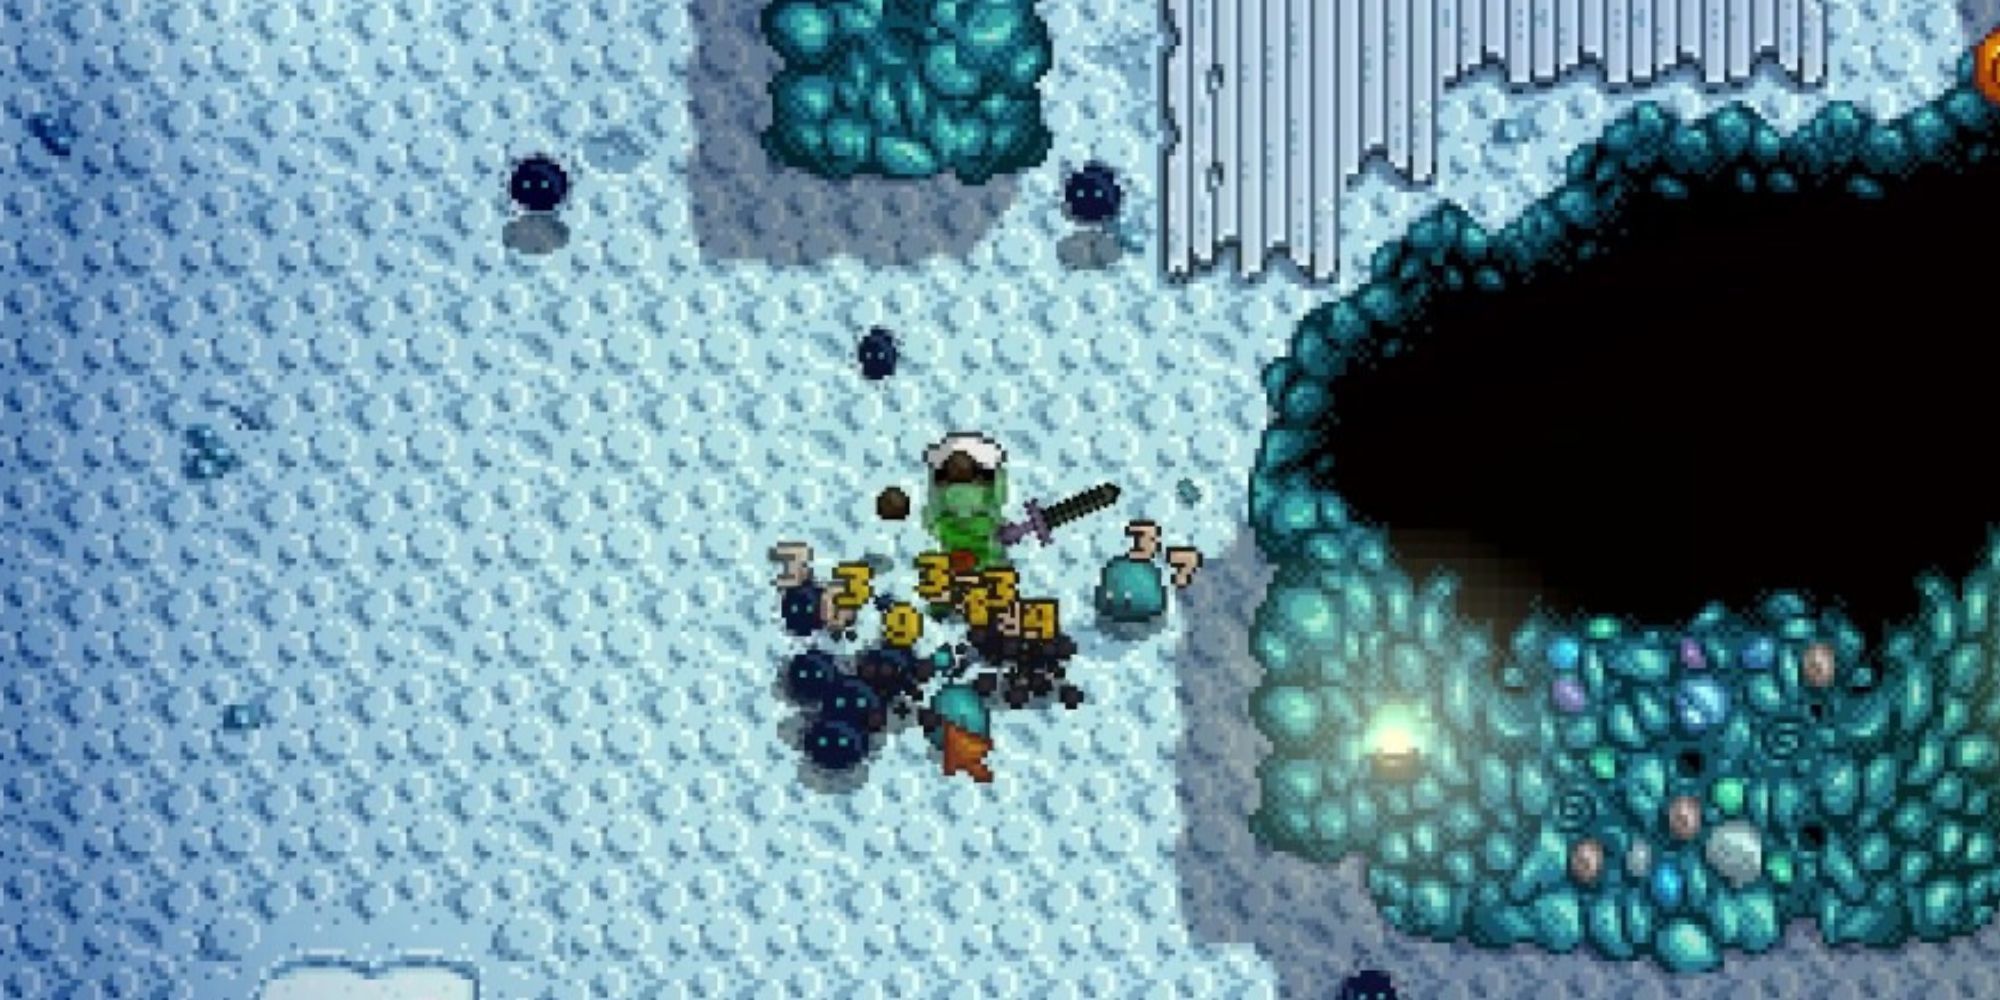 Dust Sprites Swarming the player in the frozen floors of the Mines